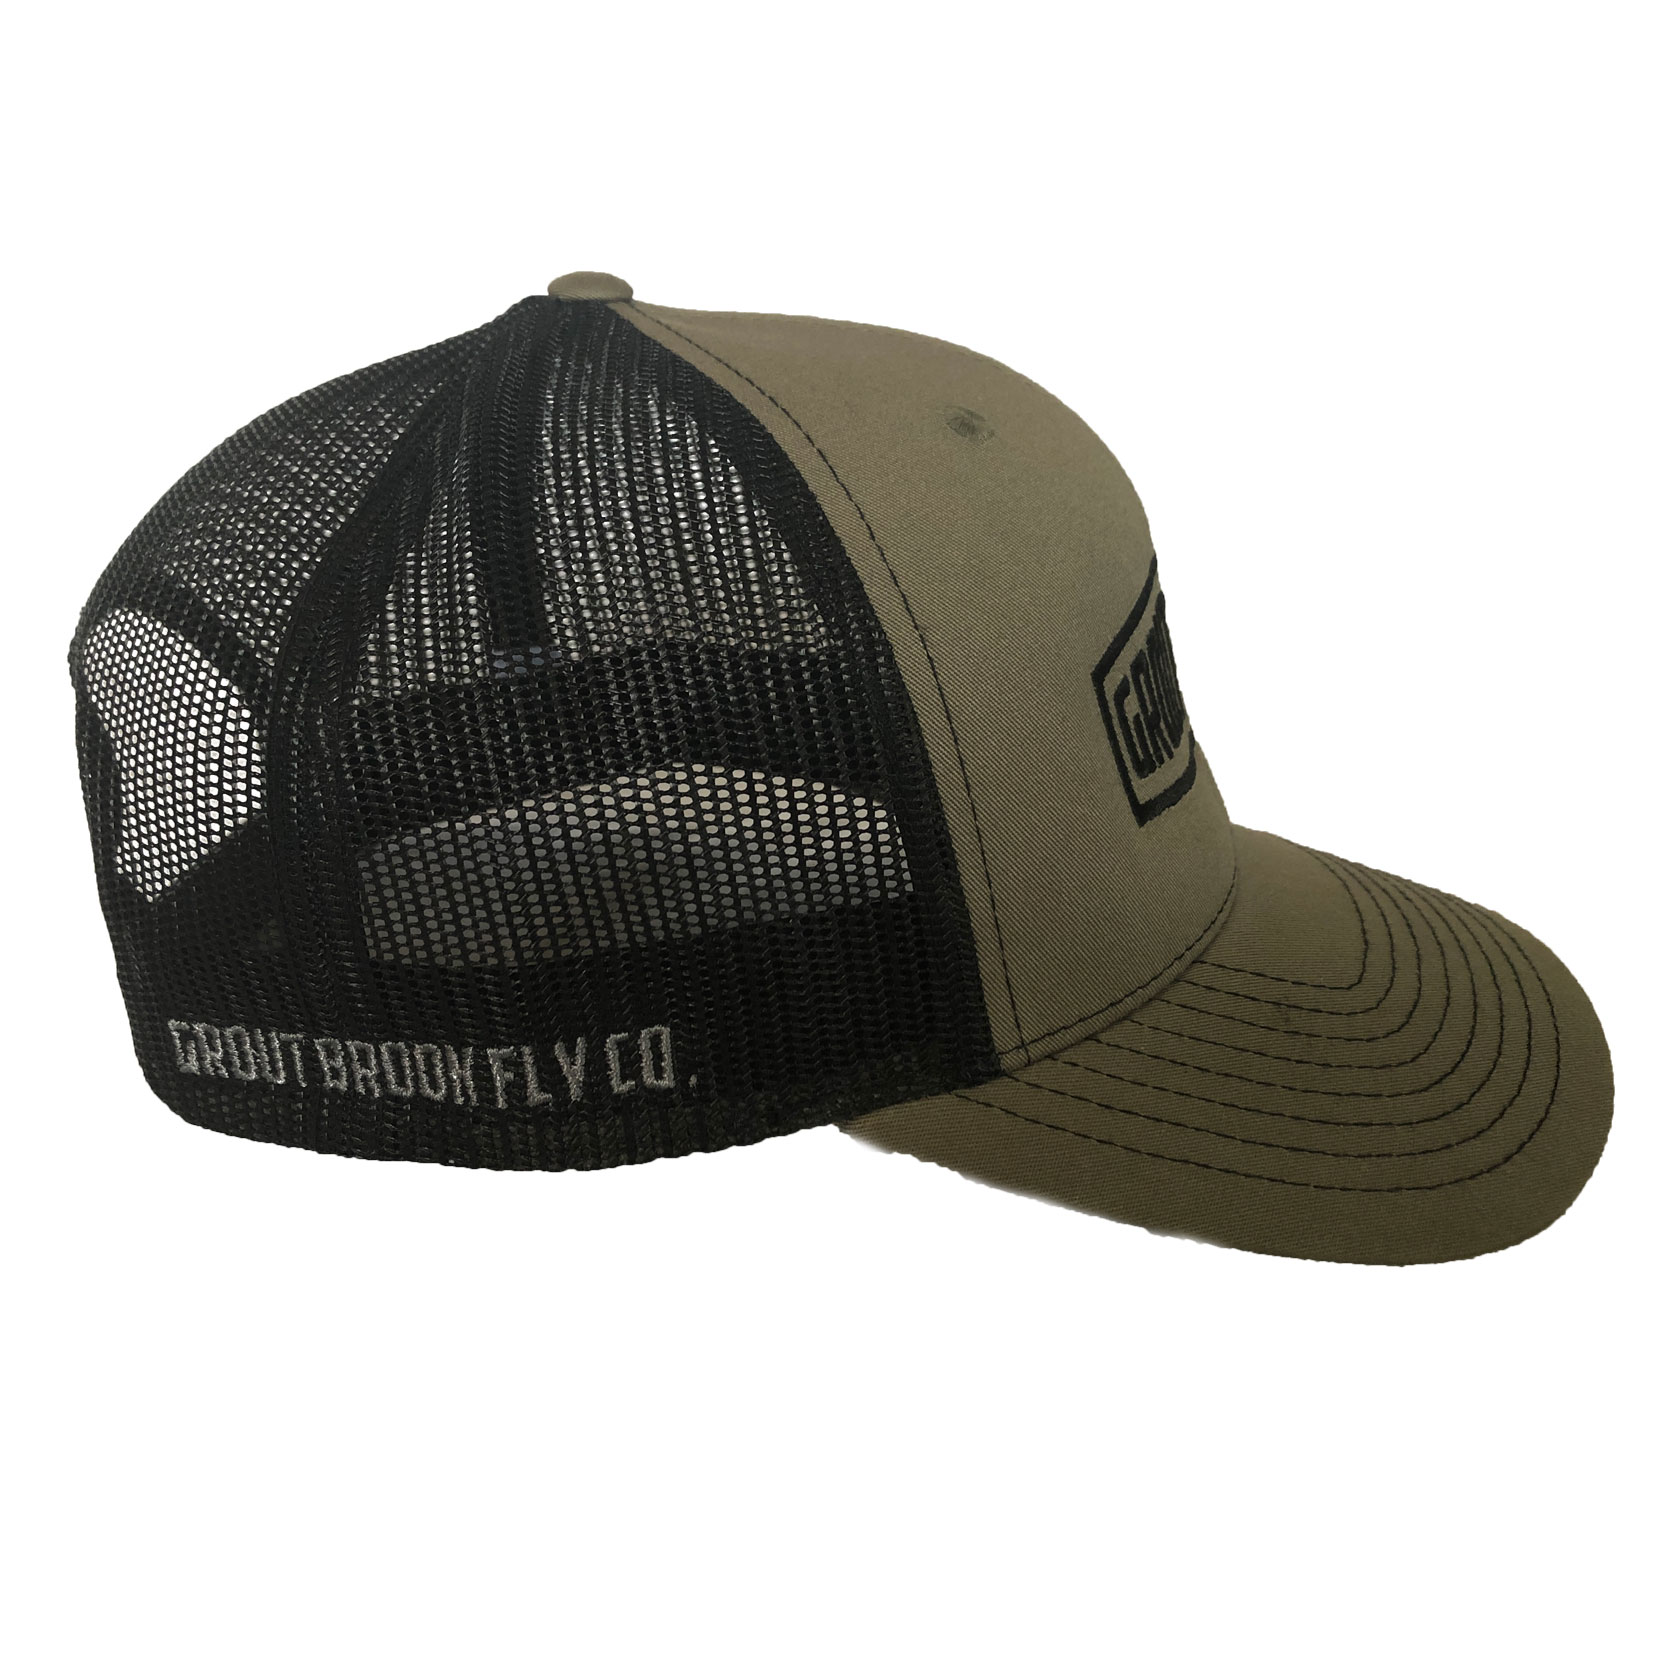 Olive Trucker Hat – Grout Brook Fly Co